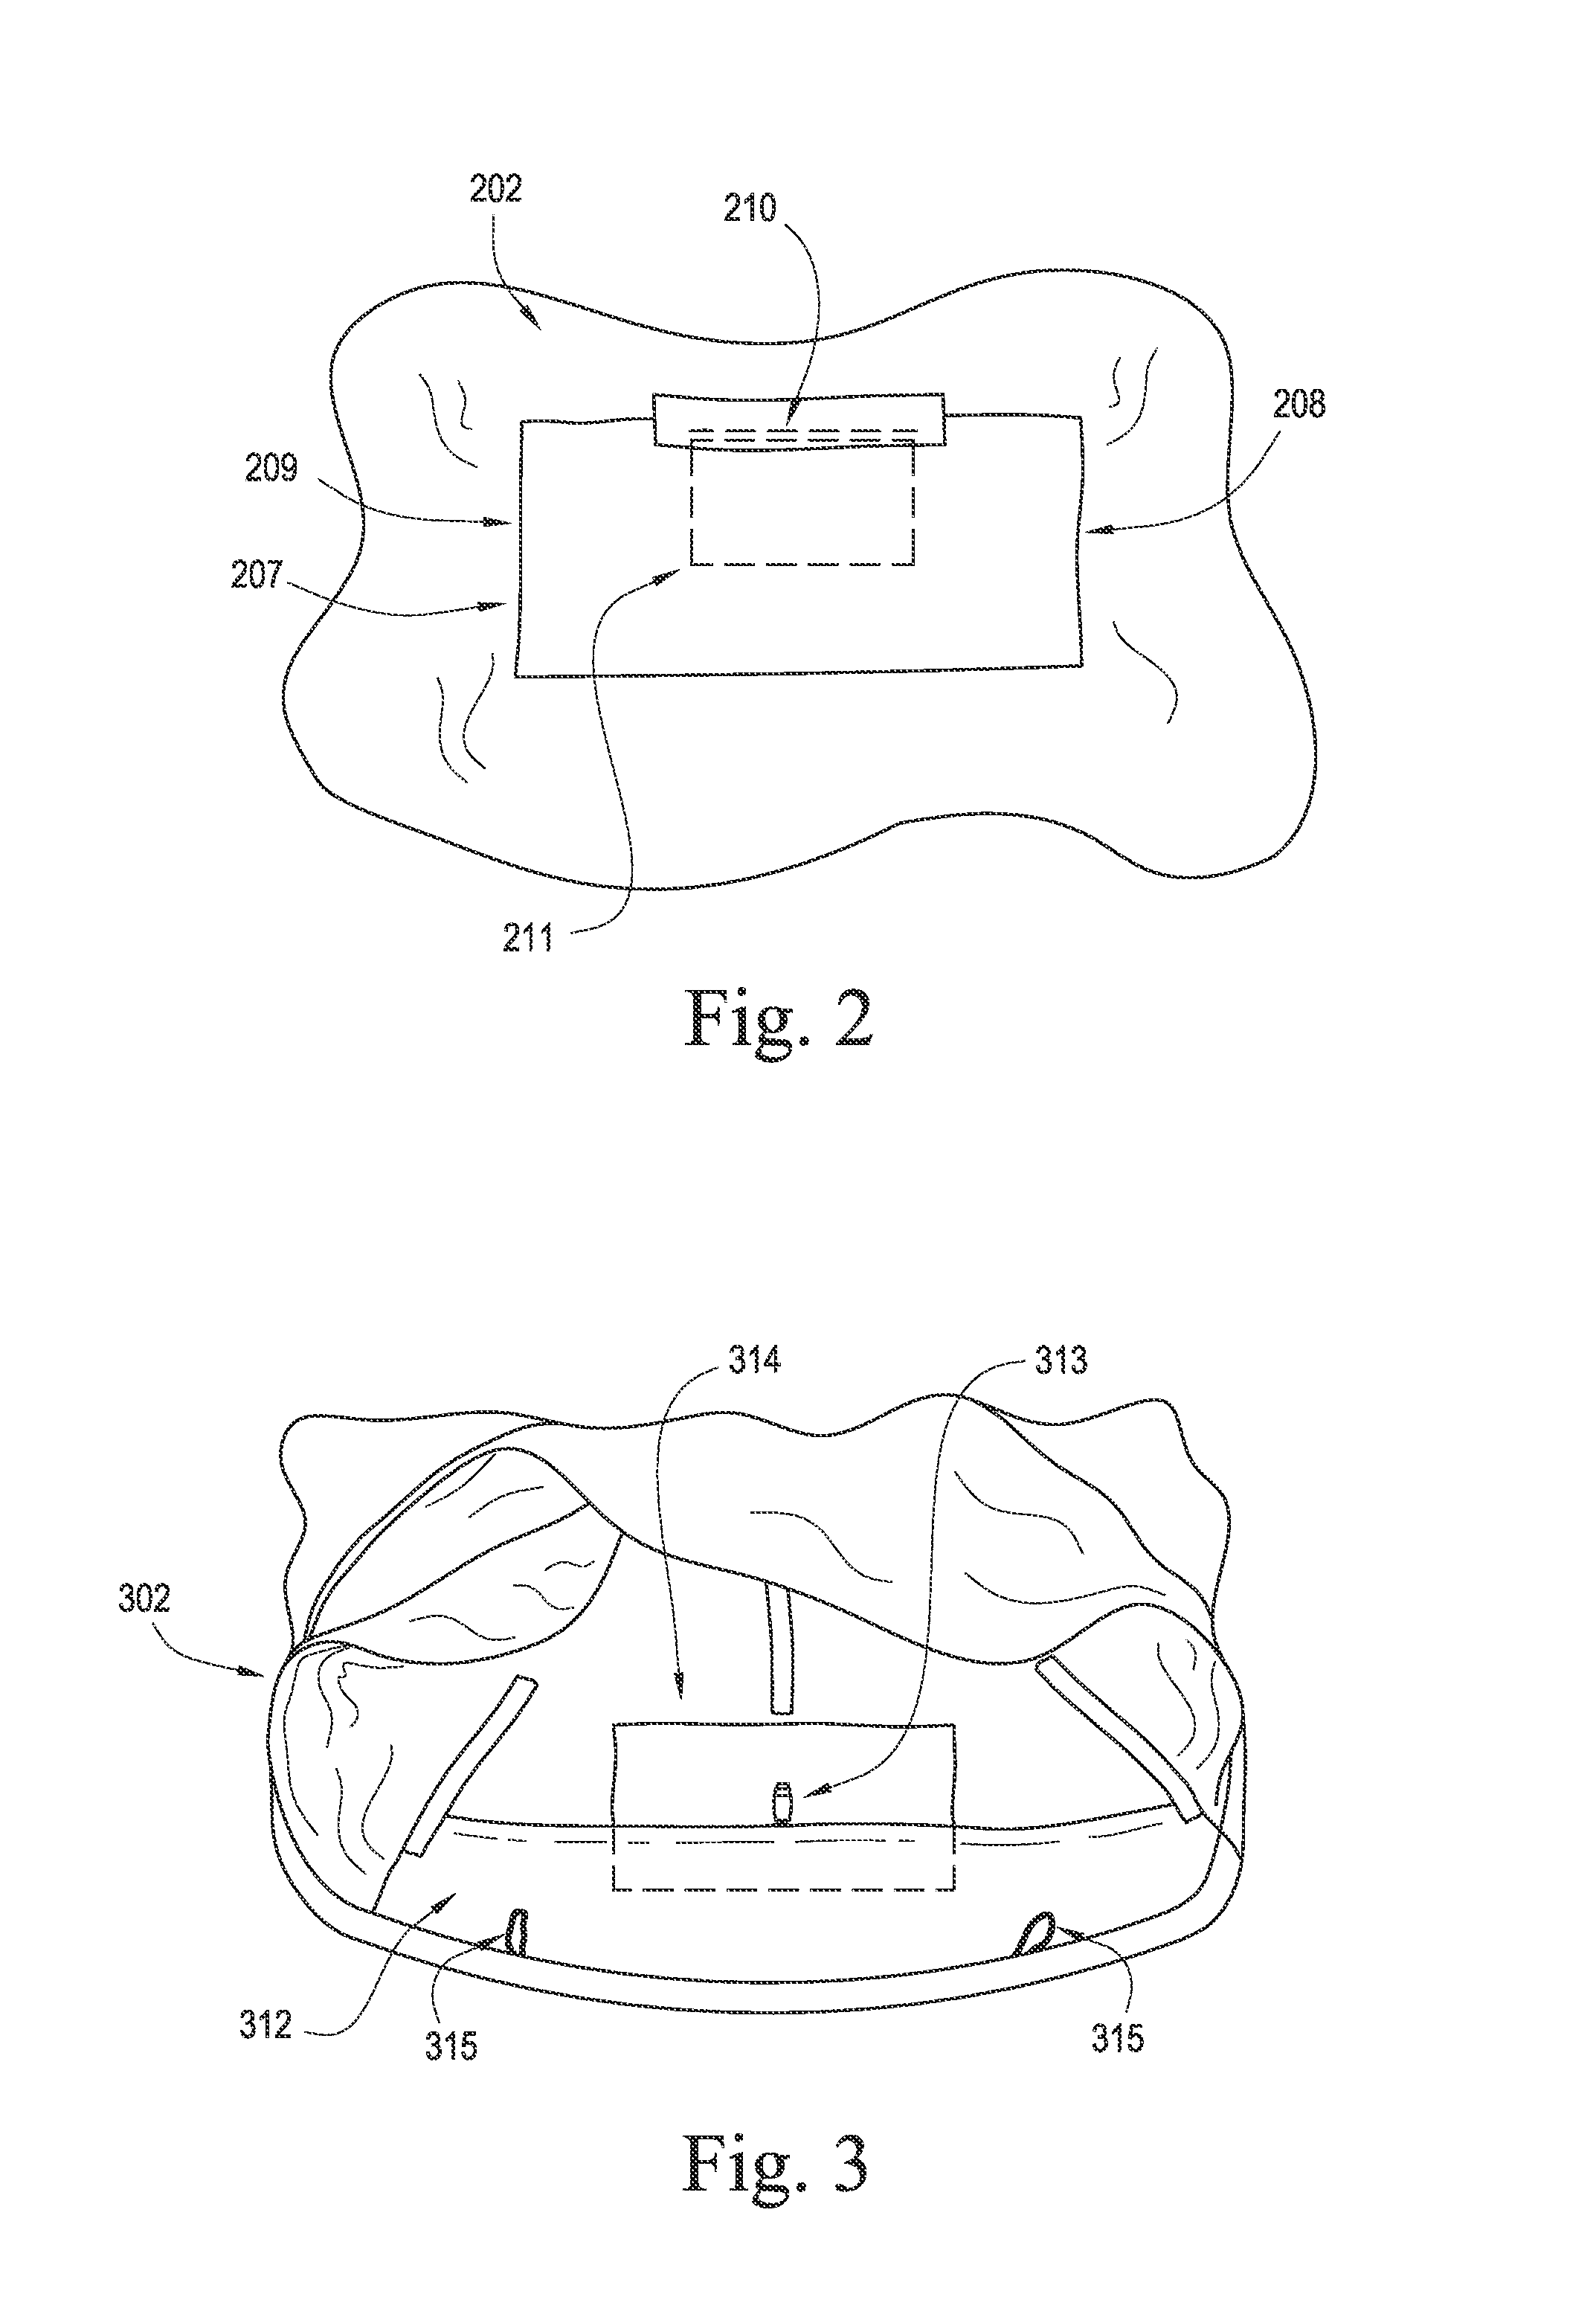 Apparatus for Protecting A Young Human From the Elements